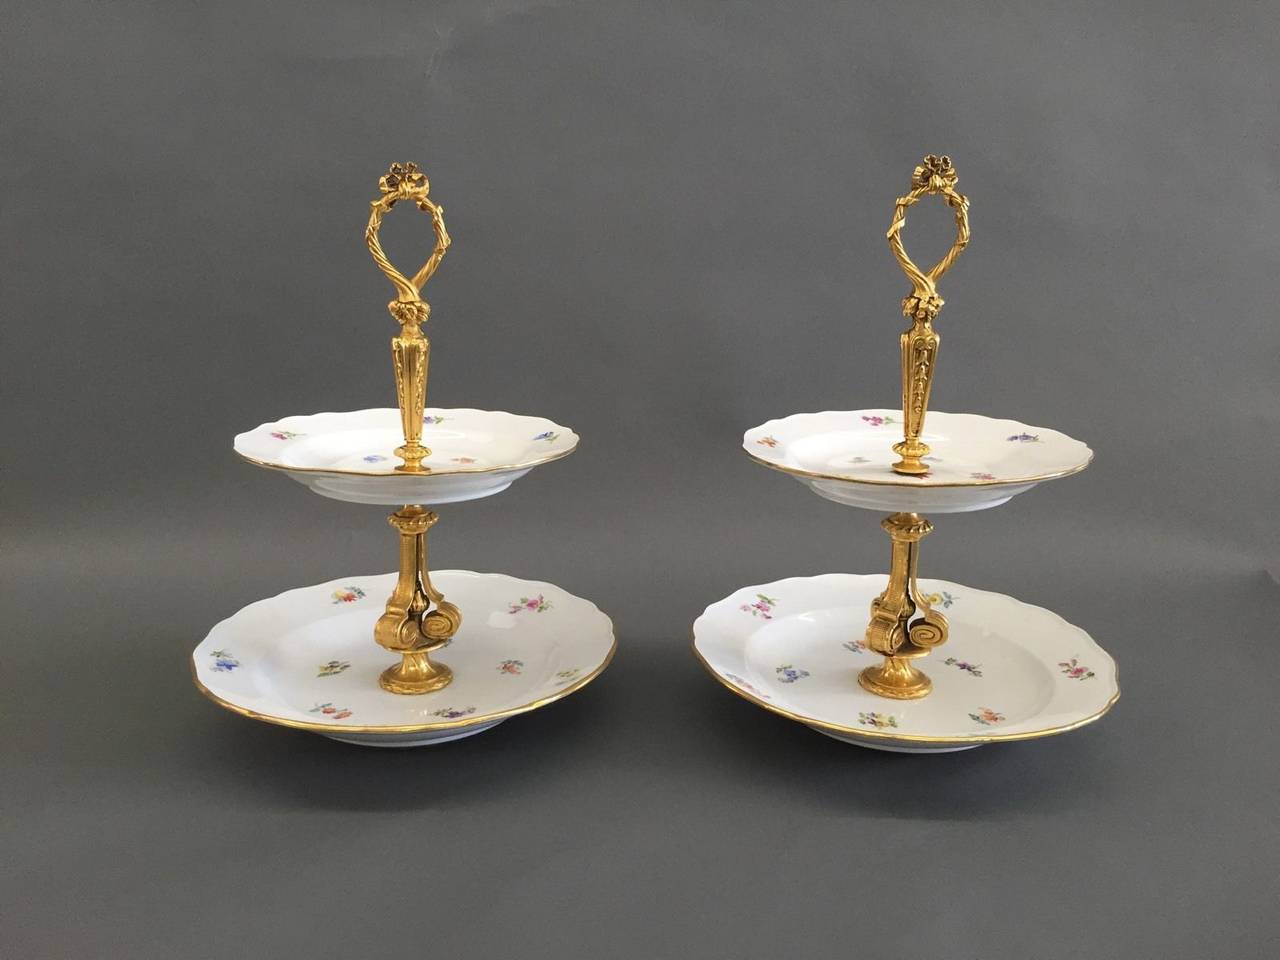 A Pair of 19th Century Meissen Porcelain two-tier dessert dishes with Gilt Bronze

Dimensions: Height: 13